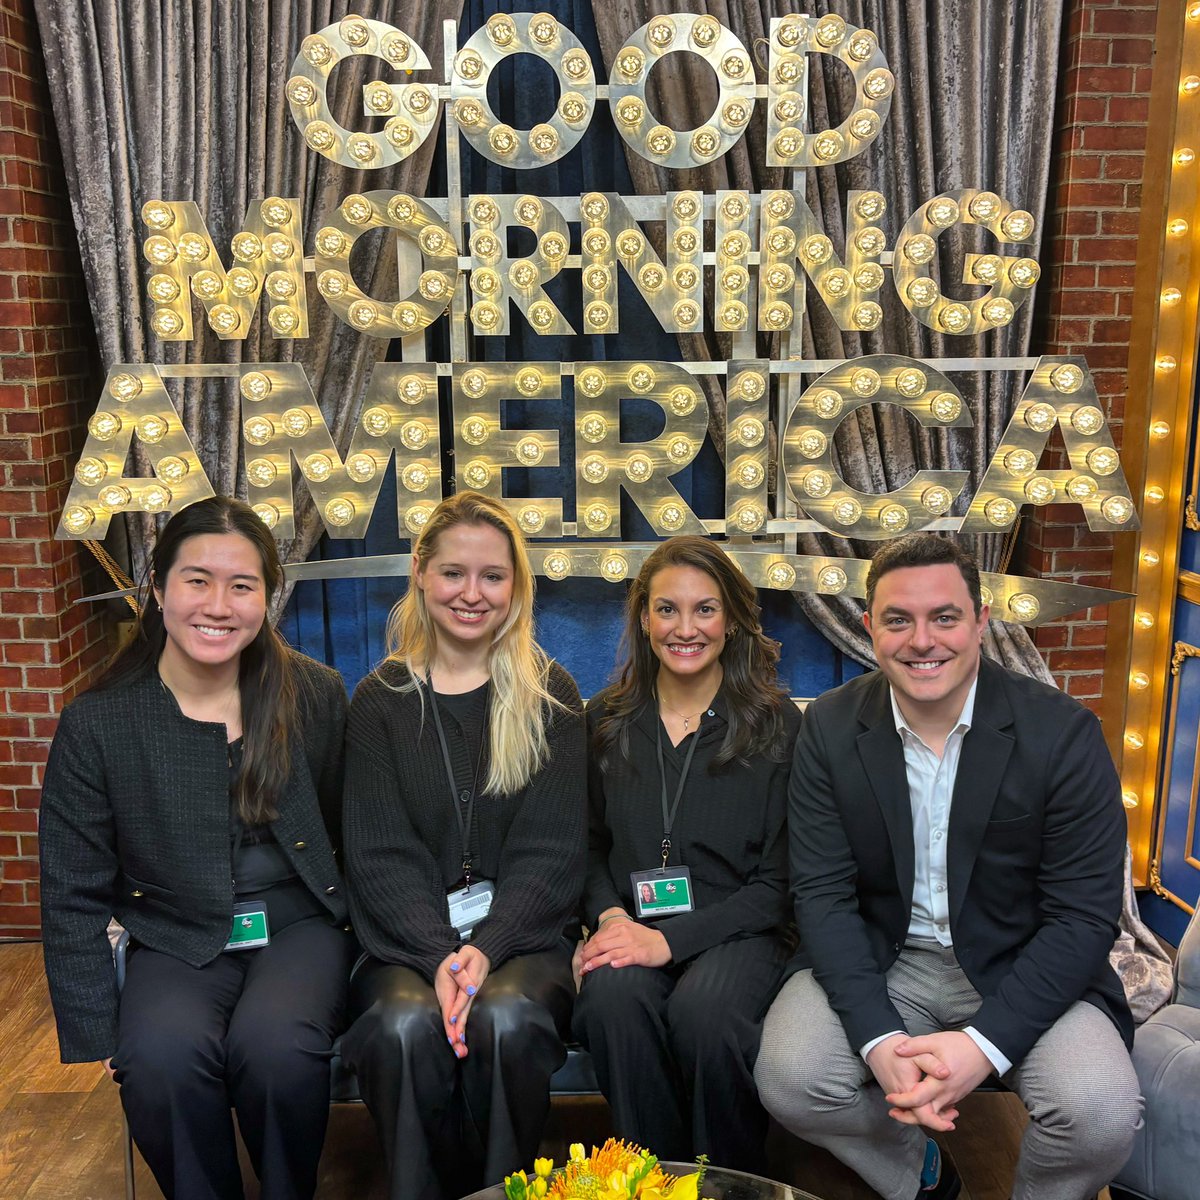 ☀️Good Morning America! from the residents on the @ABCNewsHealth Medical Unit! @GMA @ABC #MedicalJournalism